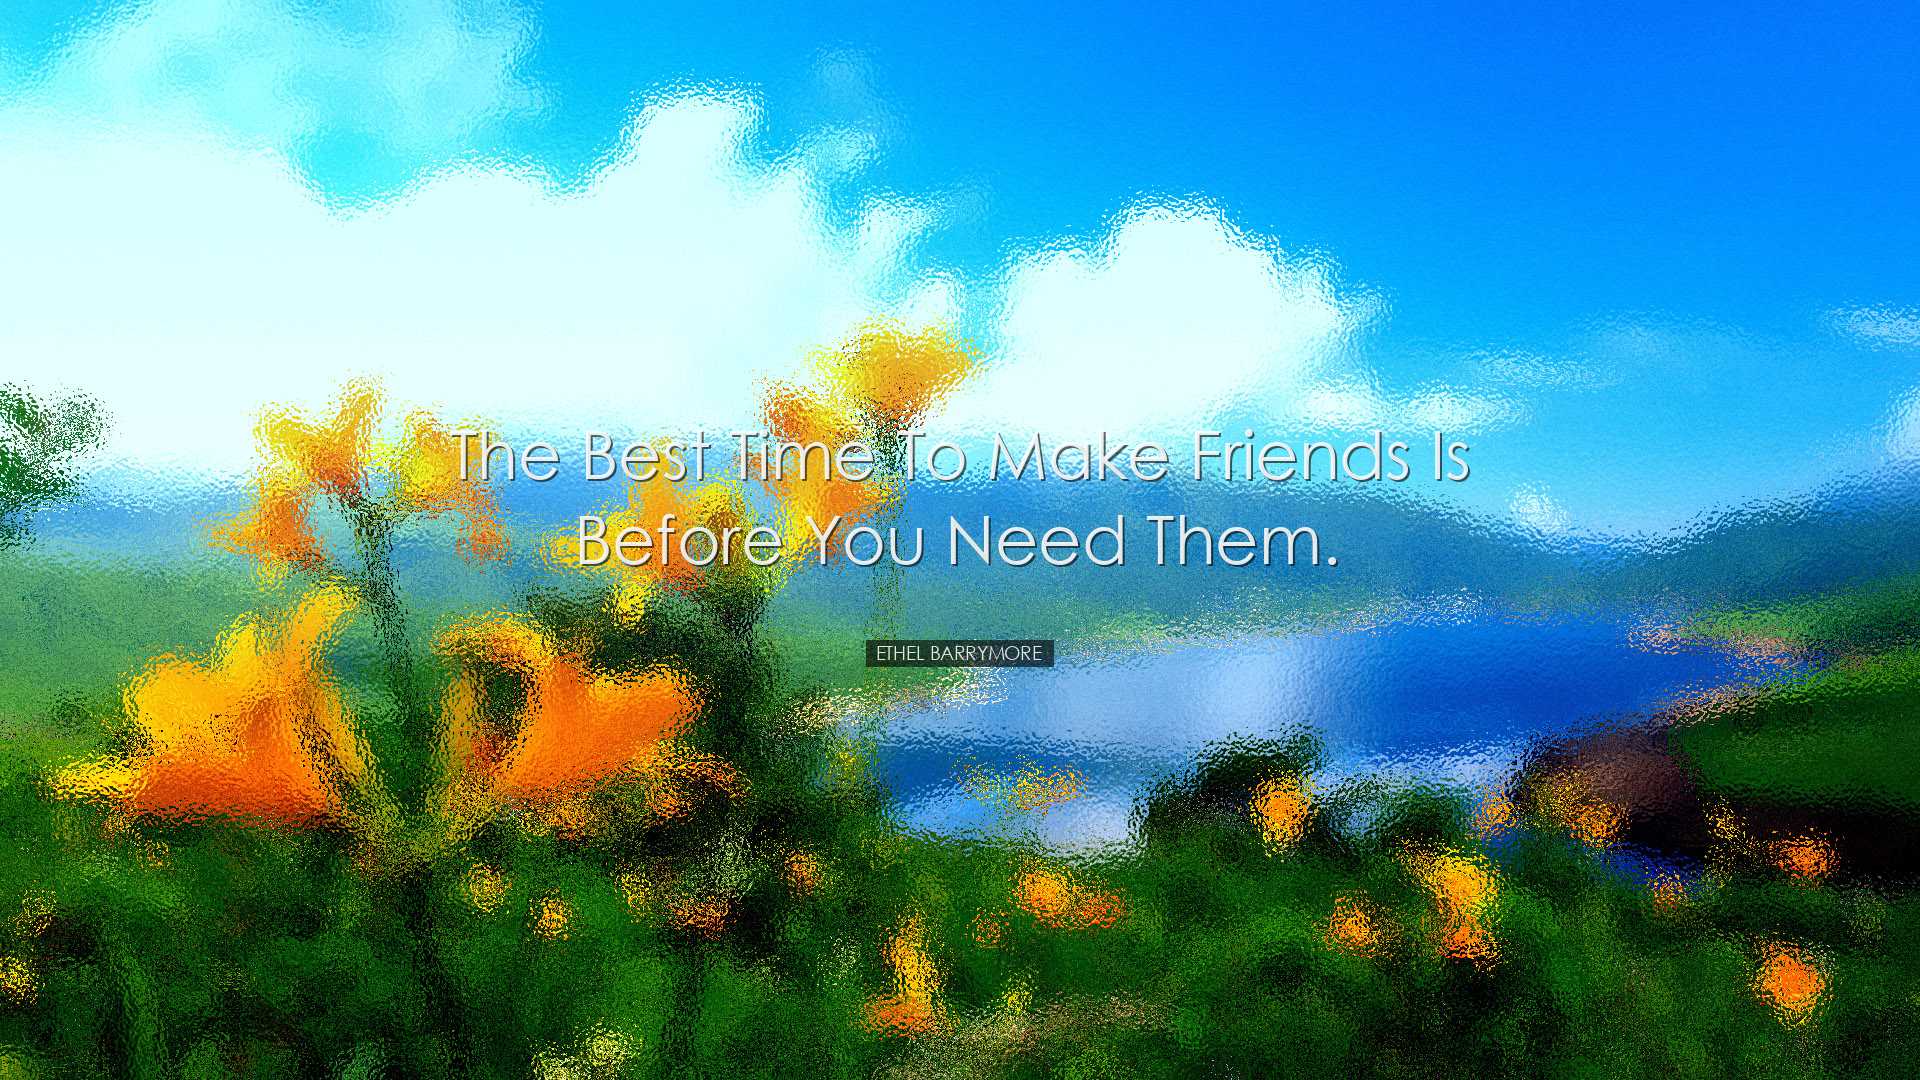 The best time to make friends is before you need them. - Ethel Bar